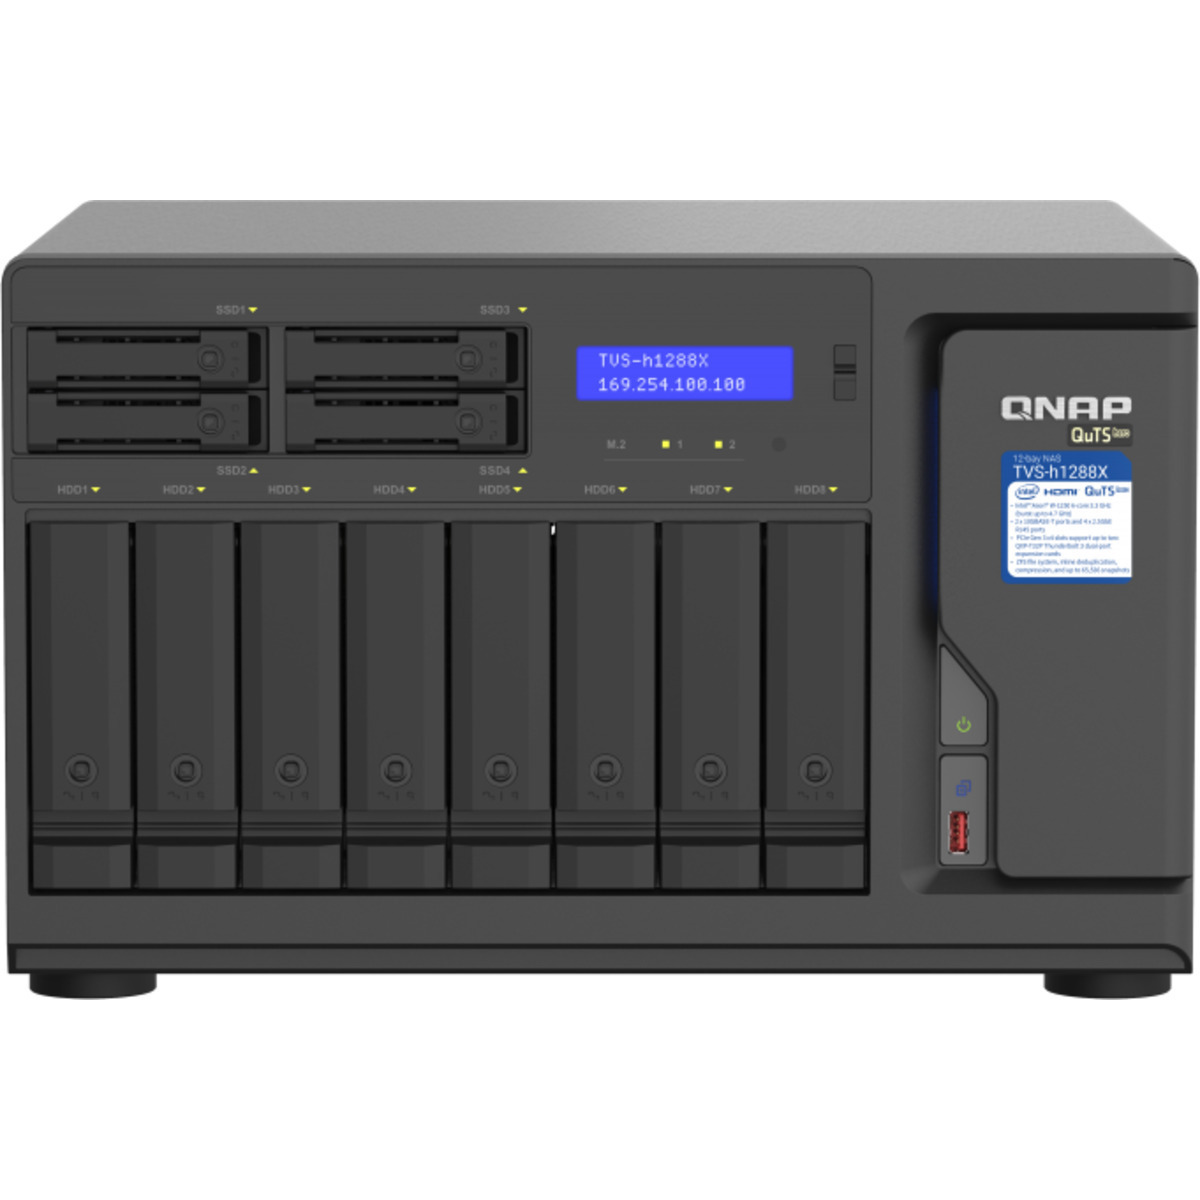 QNAP TVS-h1288X QuTS hero NAS 28tb 8+4-Bay Desktop Multimedia / Power User / Business NAS - Network Attached Storage Device 7x4tb Samsung 870 EVO MZ-77E4T0BAM 2.5 560/530MB/s SATA 6Gb/s SSD CONSUMER Class Drives Installed - Burn-In Tested - ON SALE TVS-h1288X QuTS hero NAS